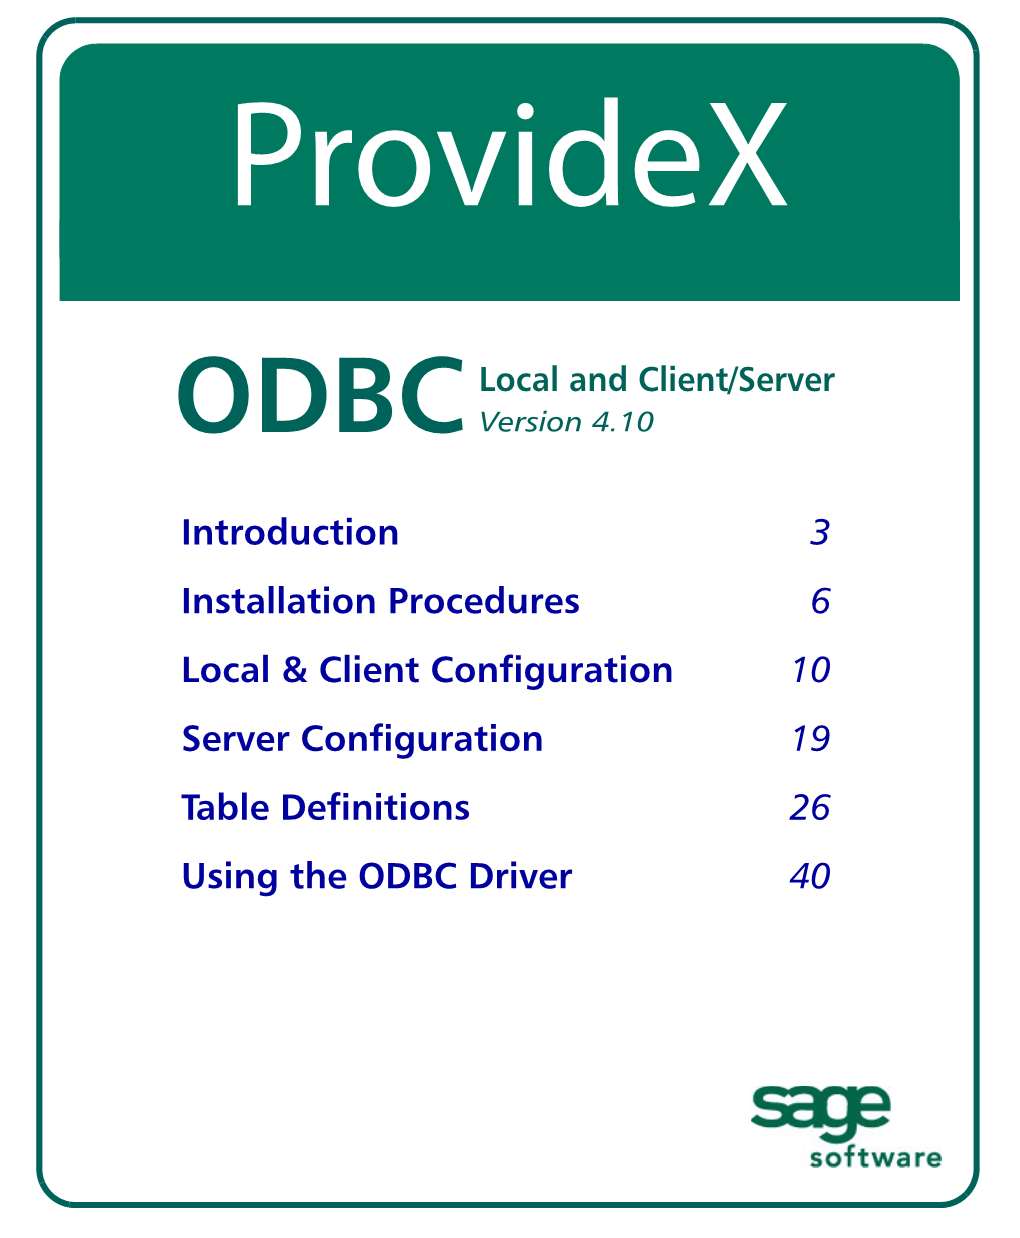 Odbclocal and Client/Server